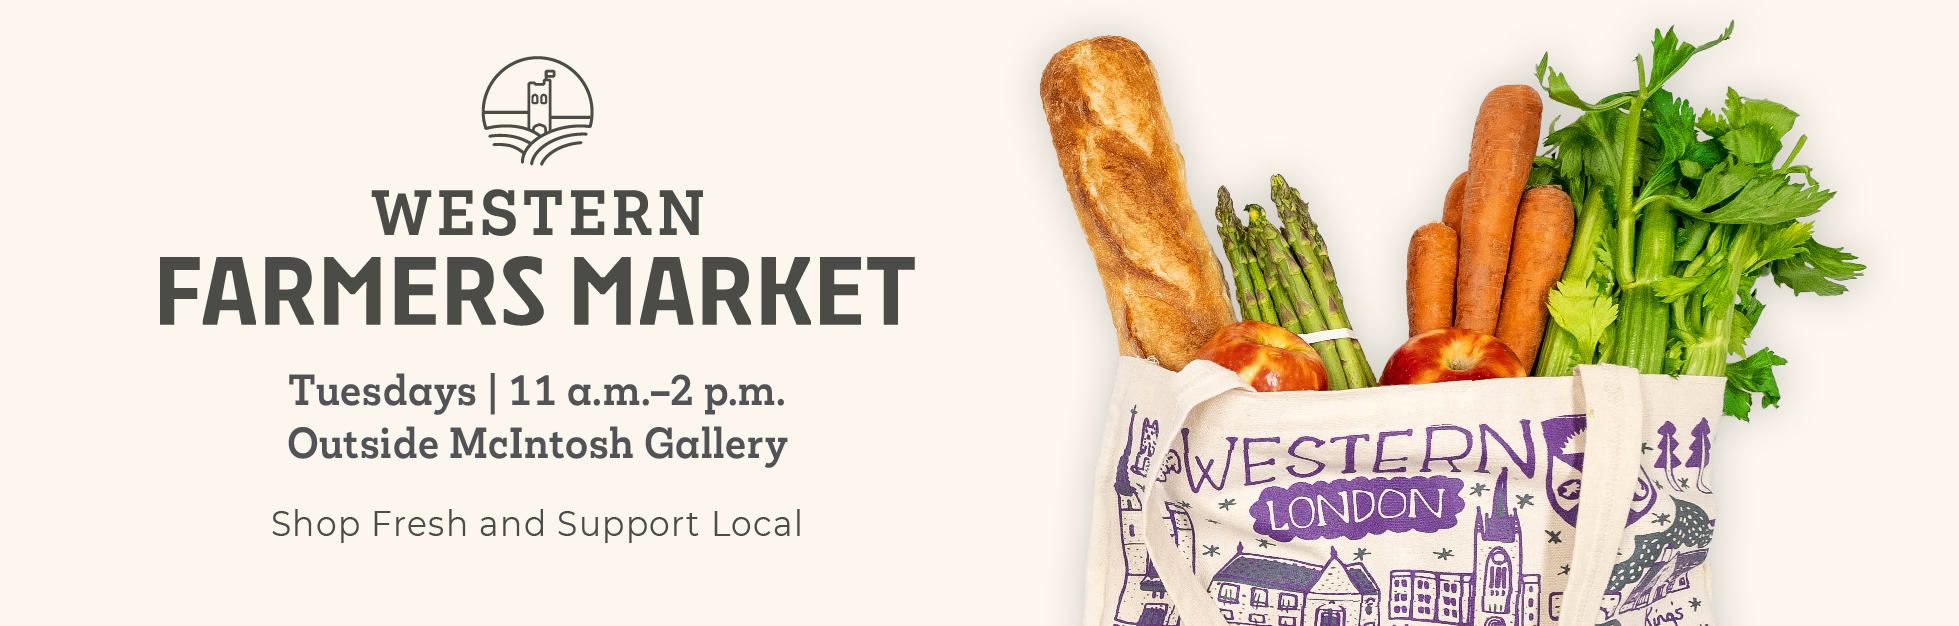 Shop Fresh and Support Local at Western Farmers Market